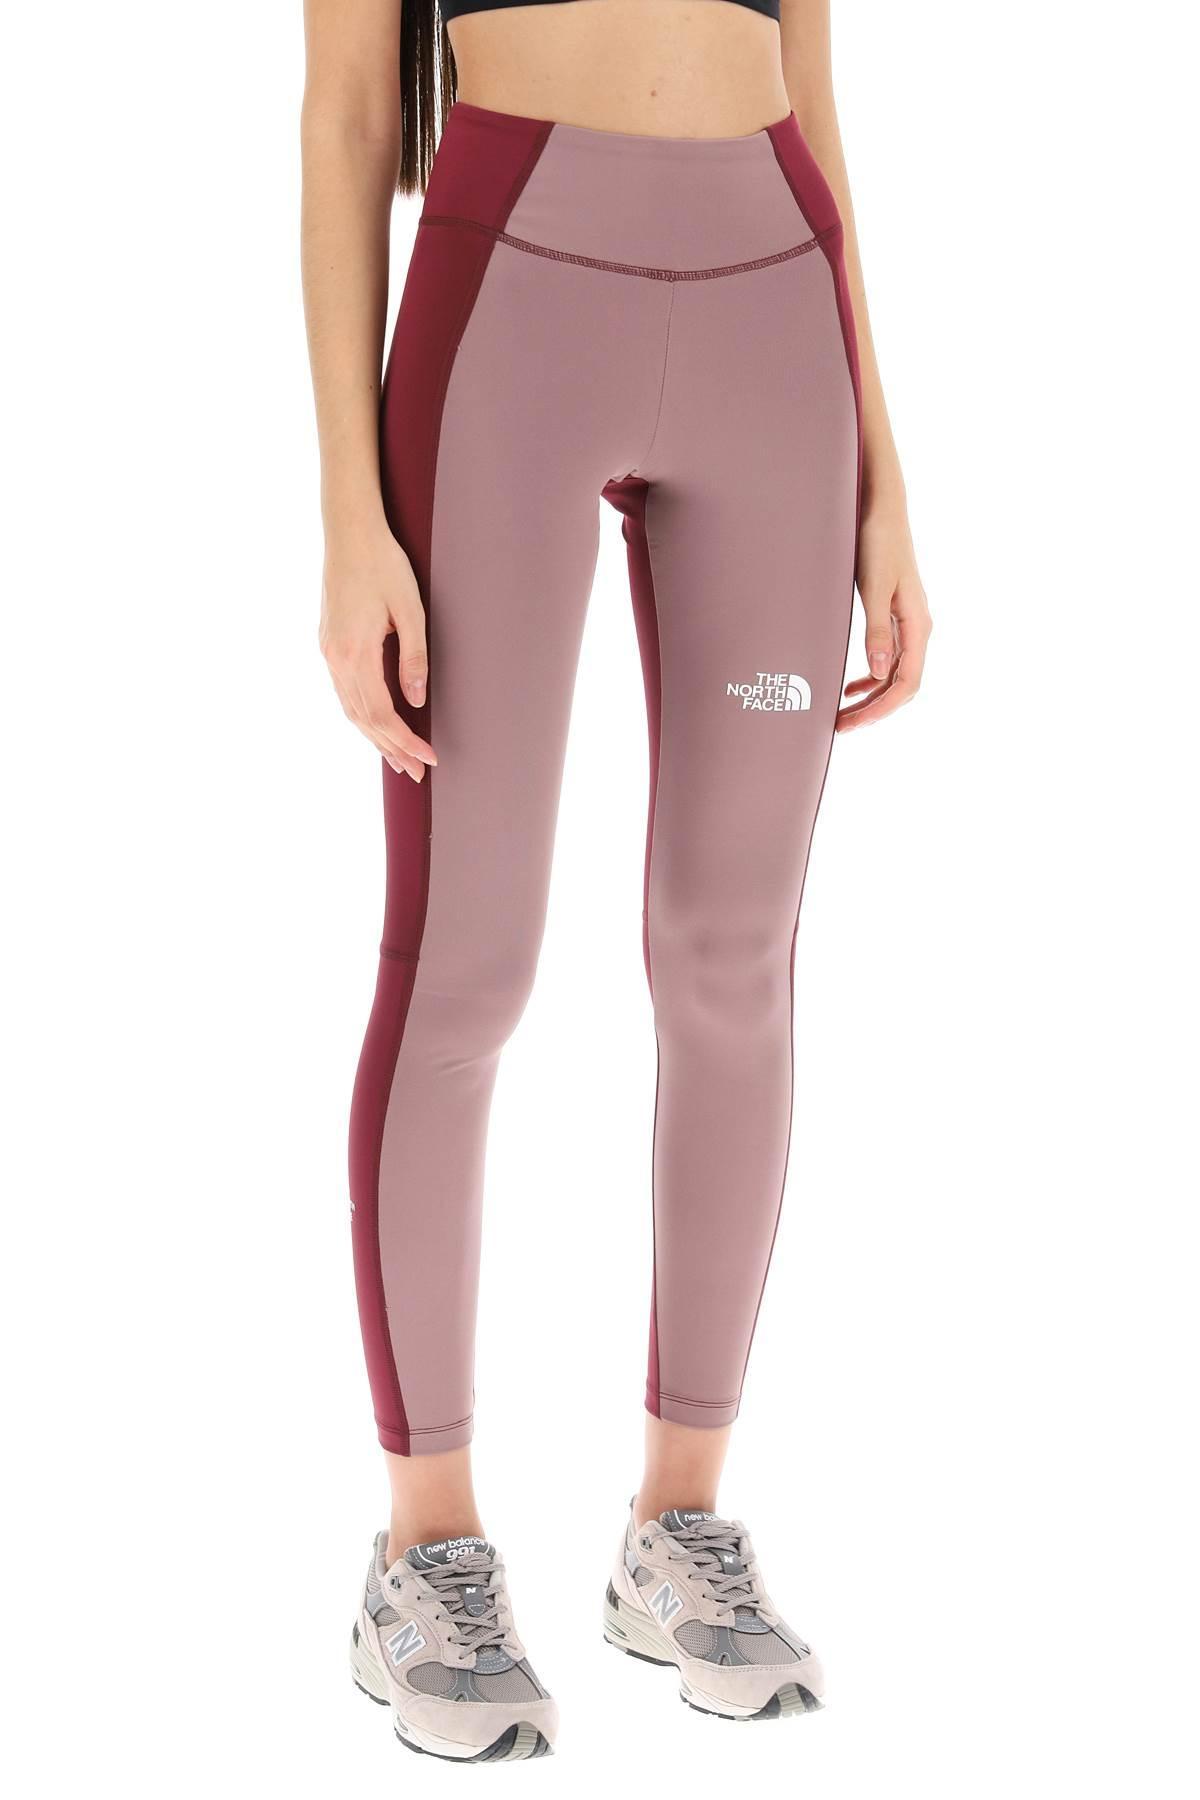 The North Face Sporty Leggings in Red